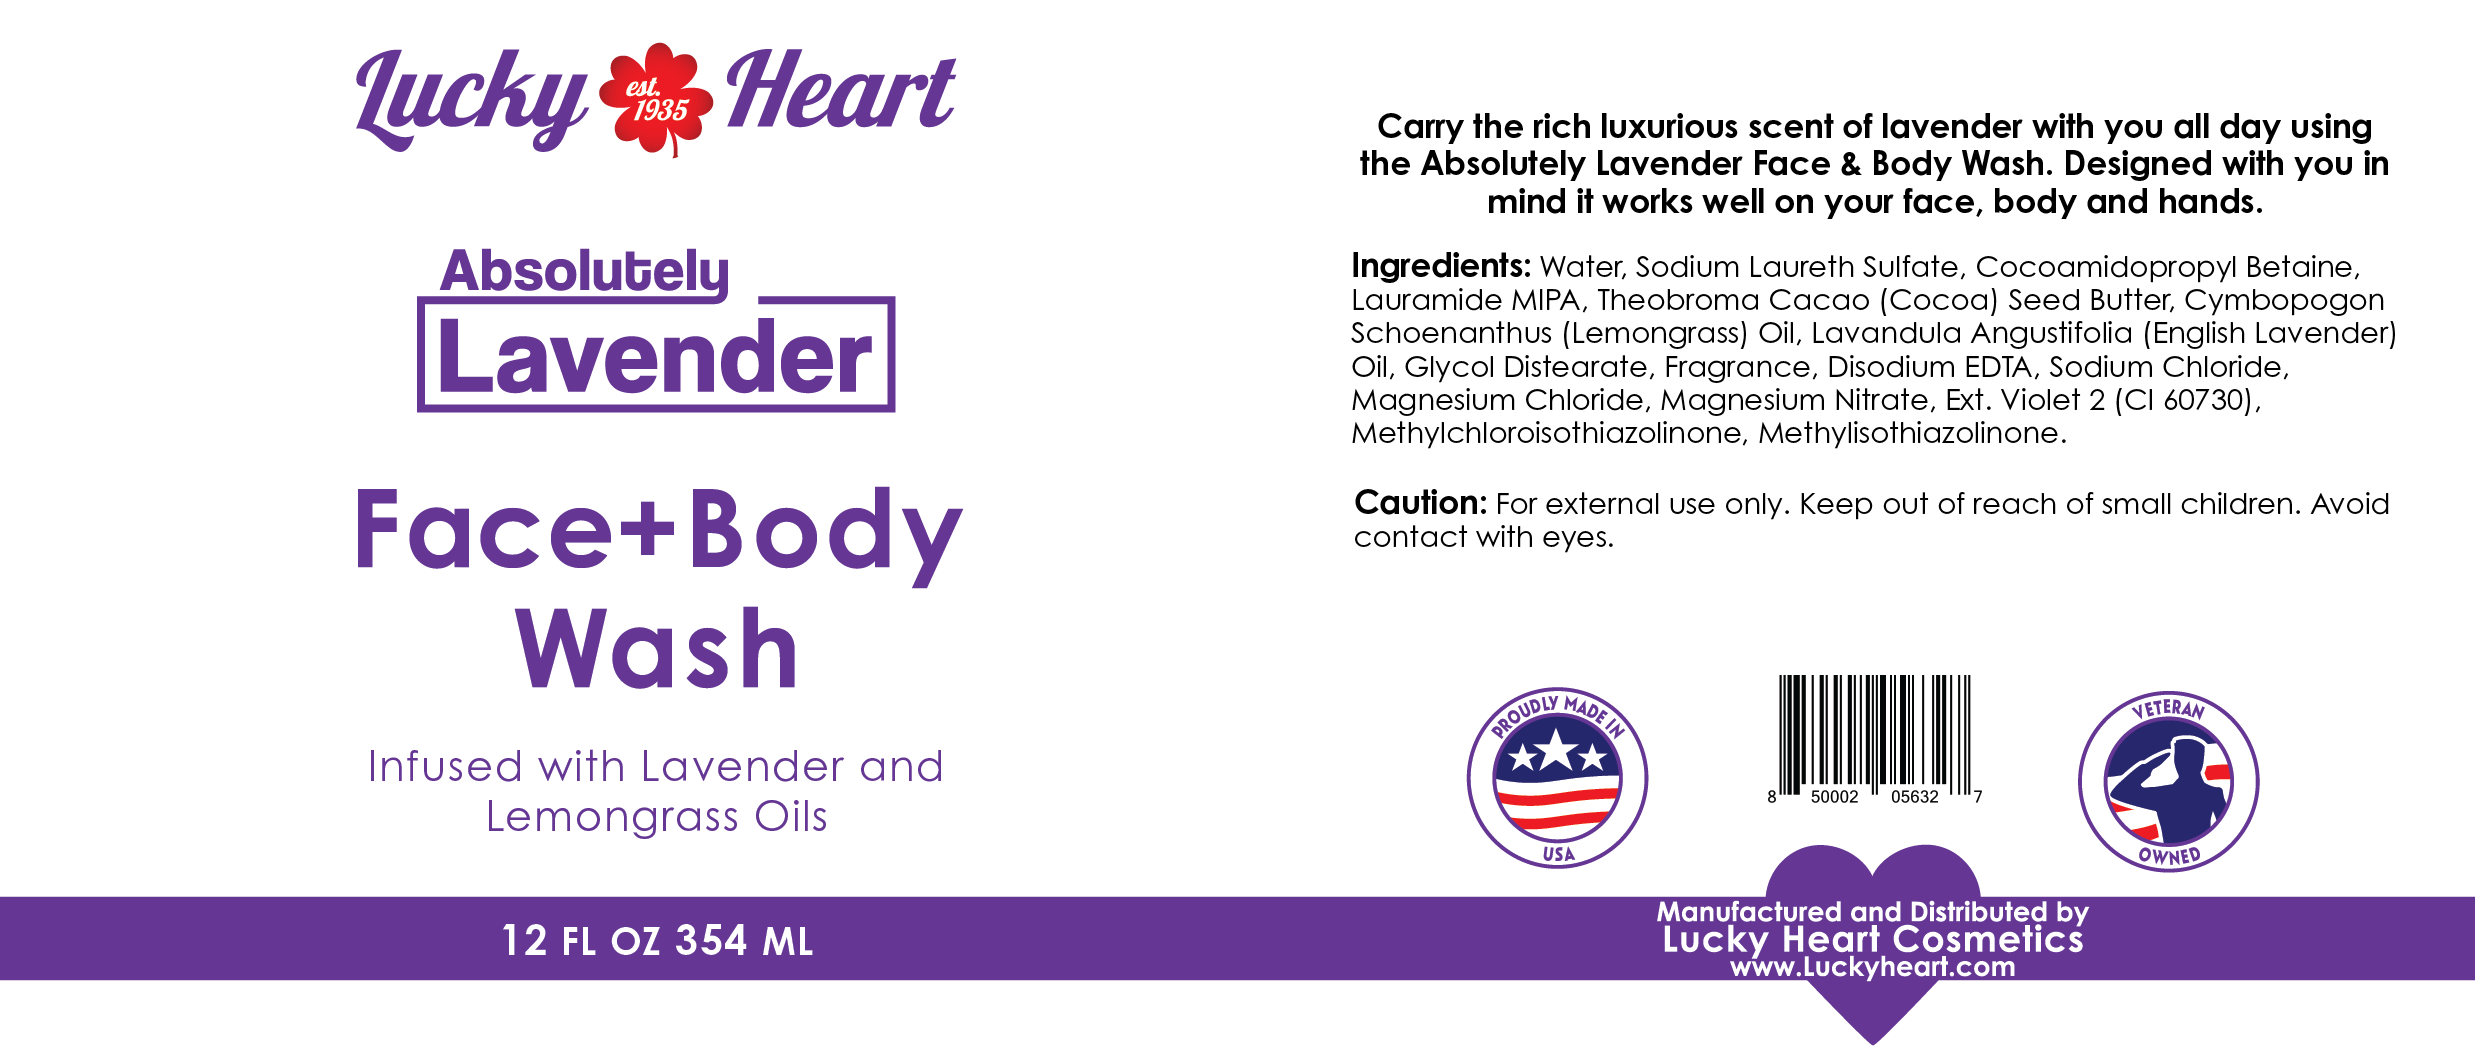 Absolutely Lavender Face & Body Wash